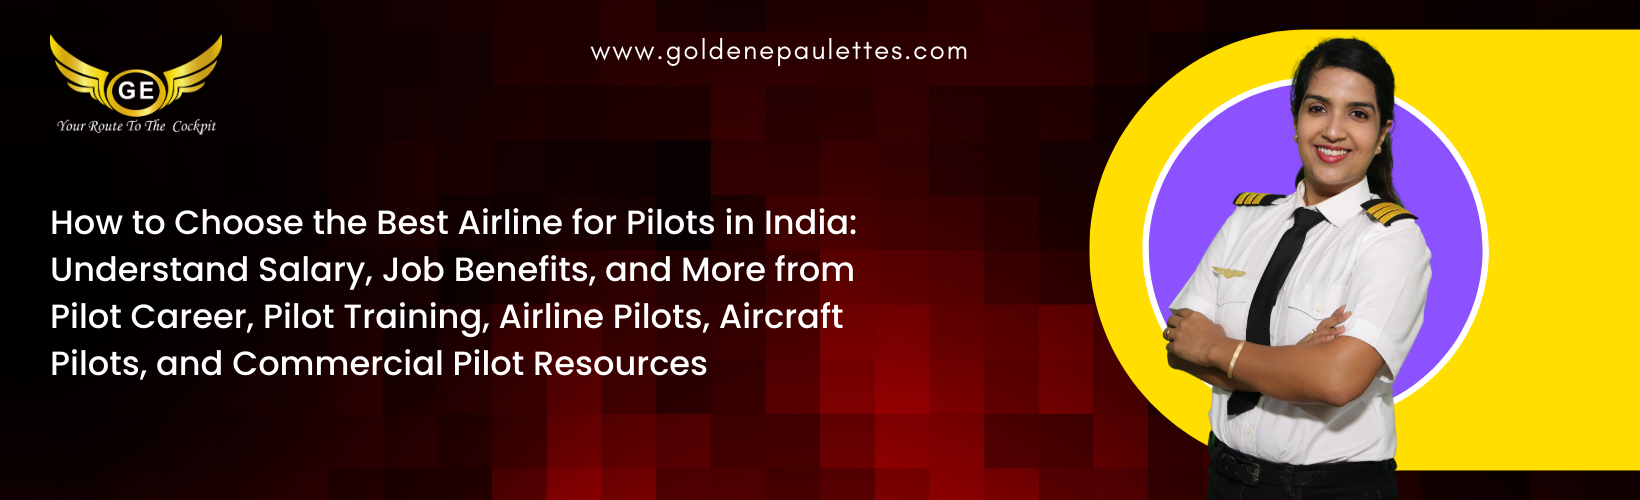 How to Choose the Best Airline for Pilots in India